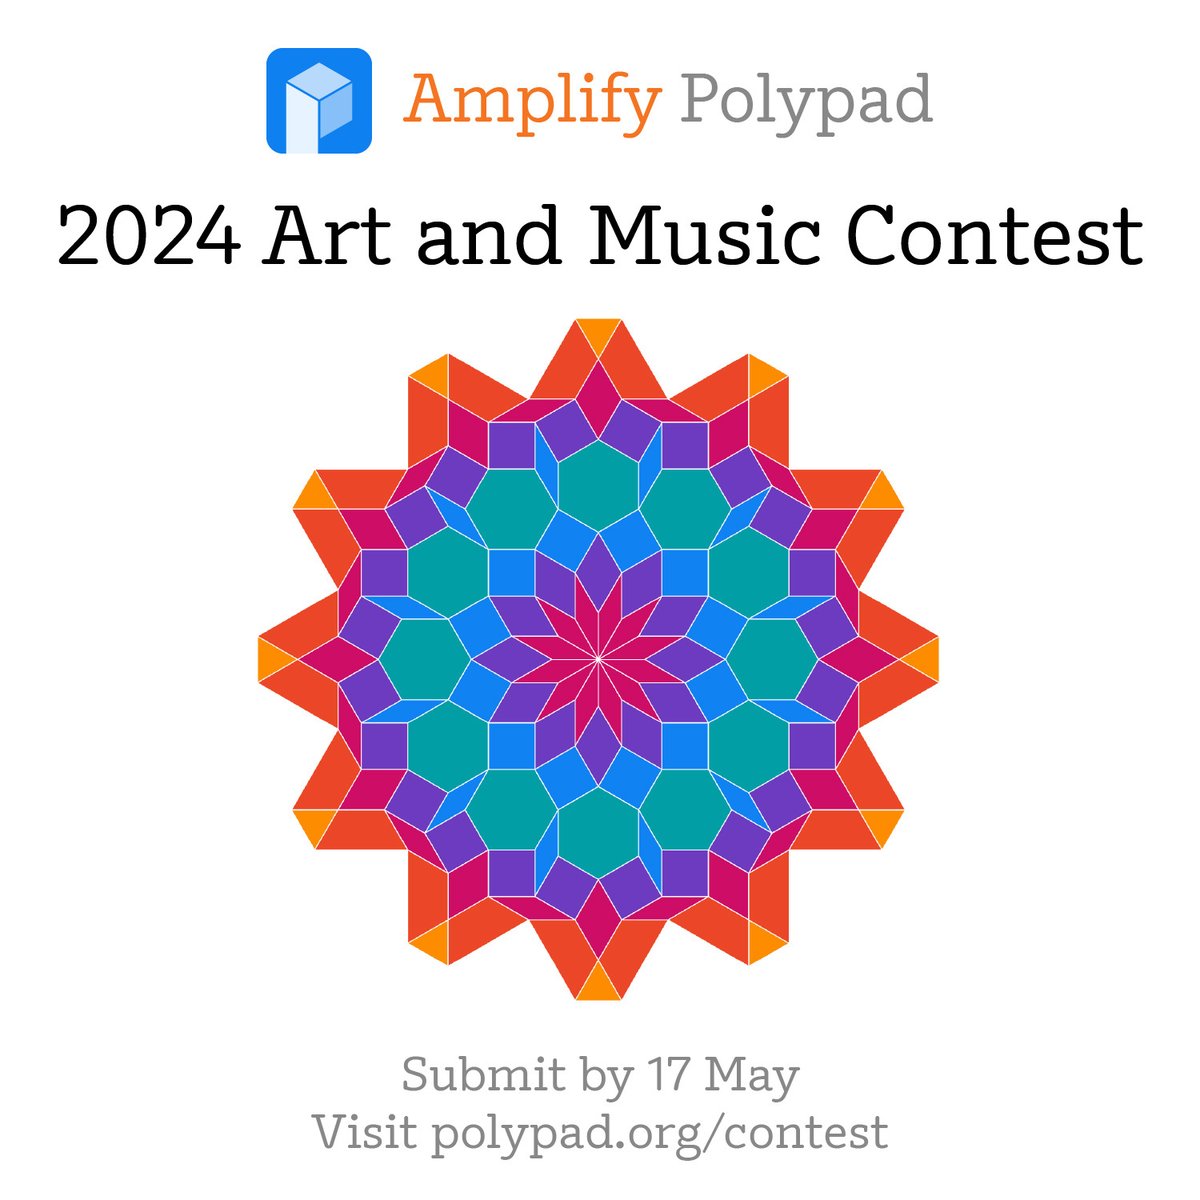 5 Days left in the Polypad Art Contest! Still plenty of time for students around the world aged 18 and under to submit an entry. Visit polypad.amplify.com/contest to learn more and get started.